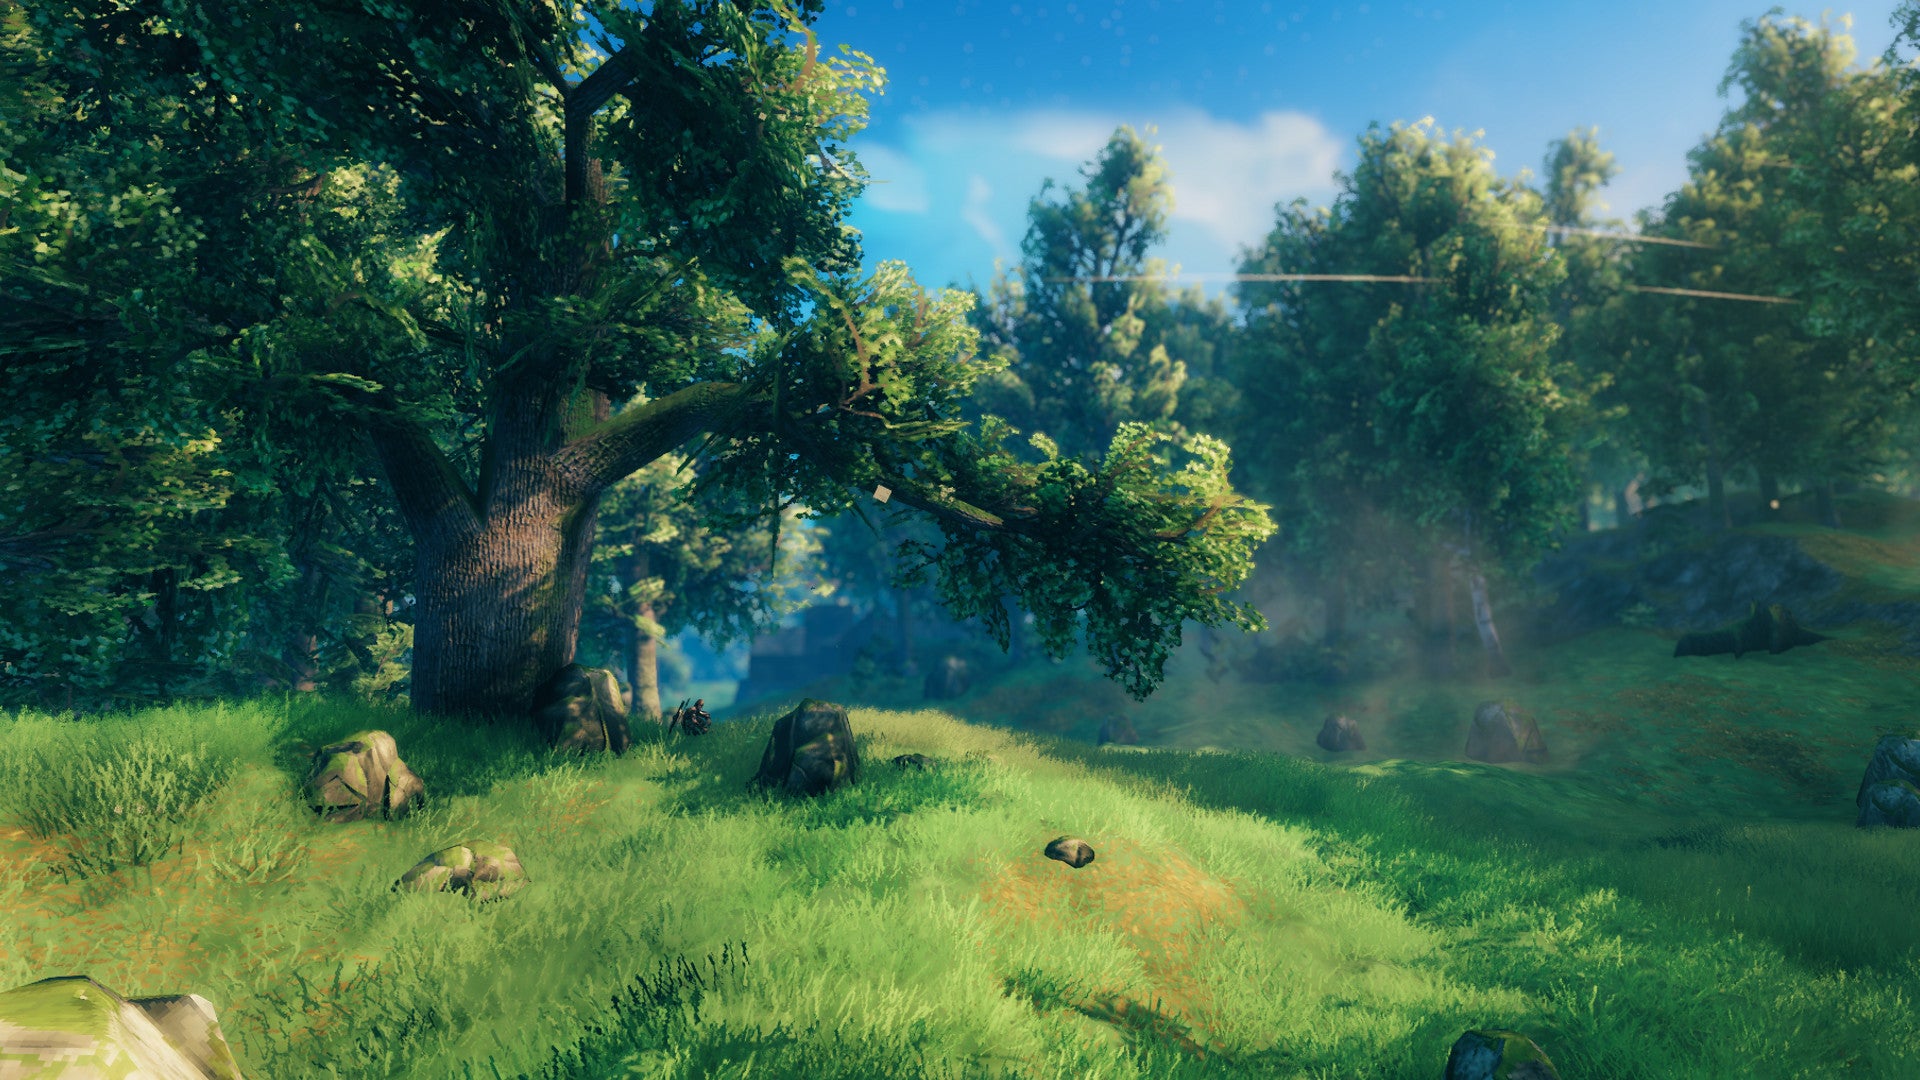 A Valheim screenshot of a Meadows biome, with a large Oak Tree in the foreground on the left.